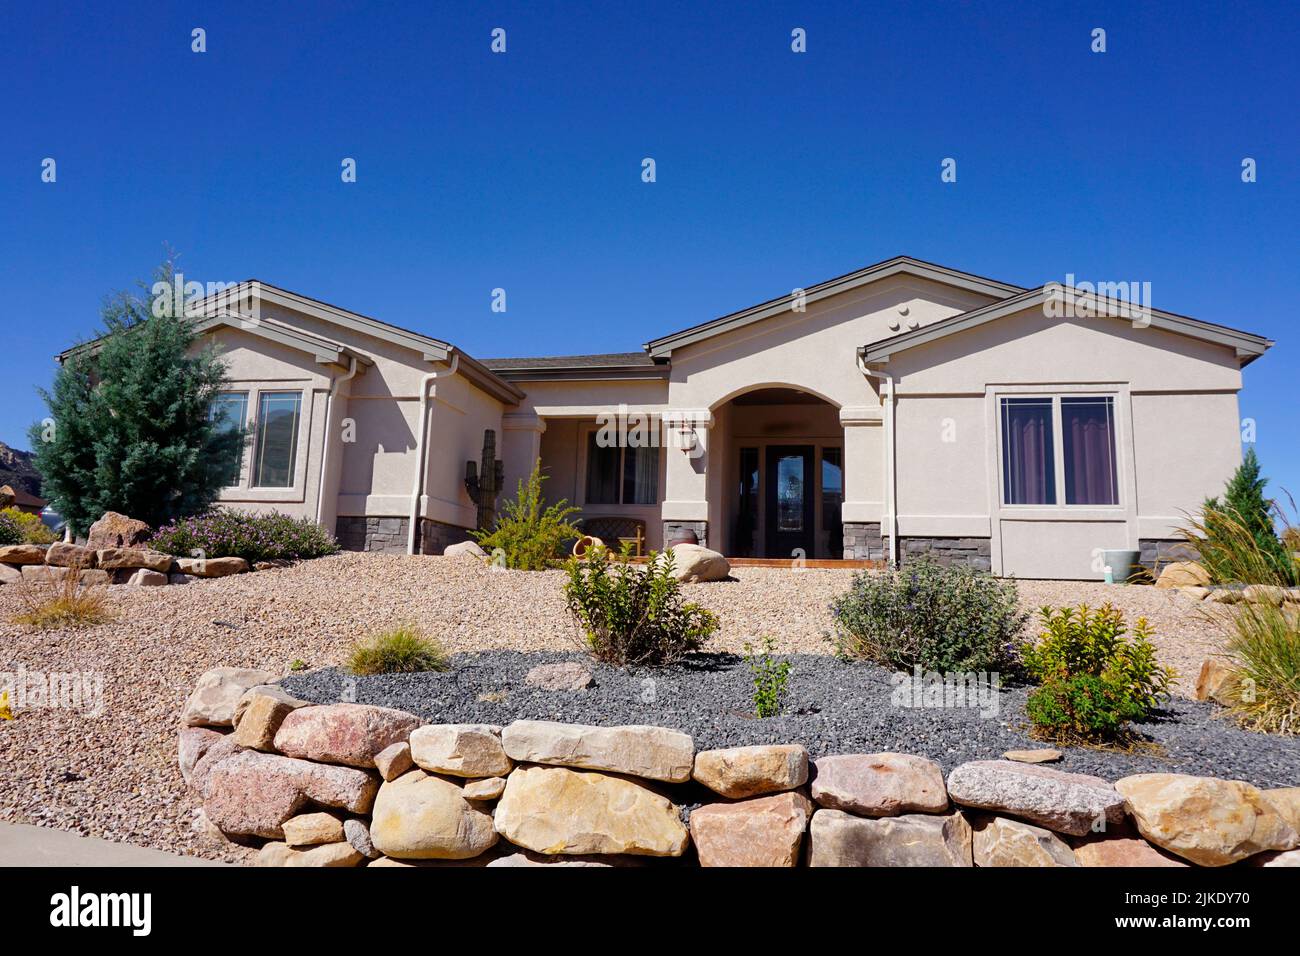 Modern stucco house with drought tolerant landscaping Stock Photo